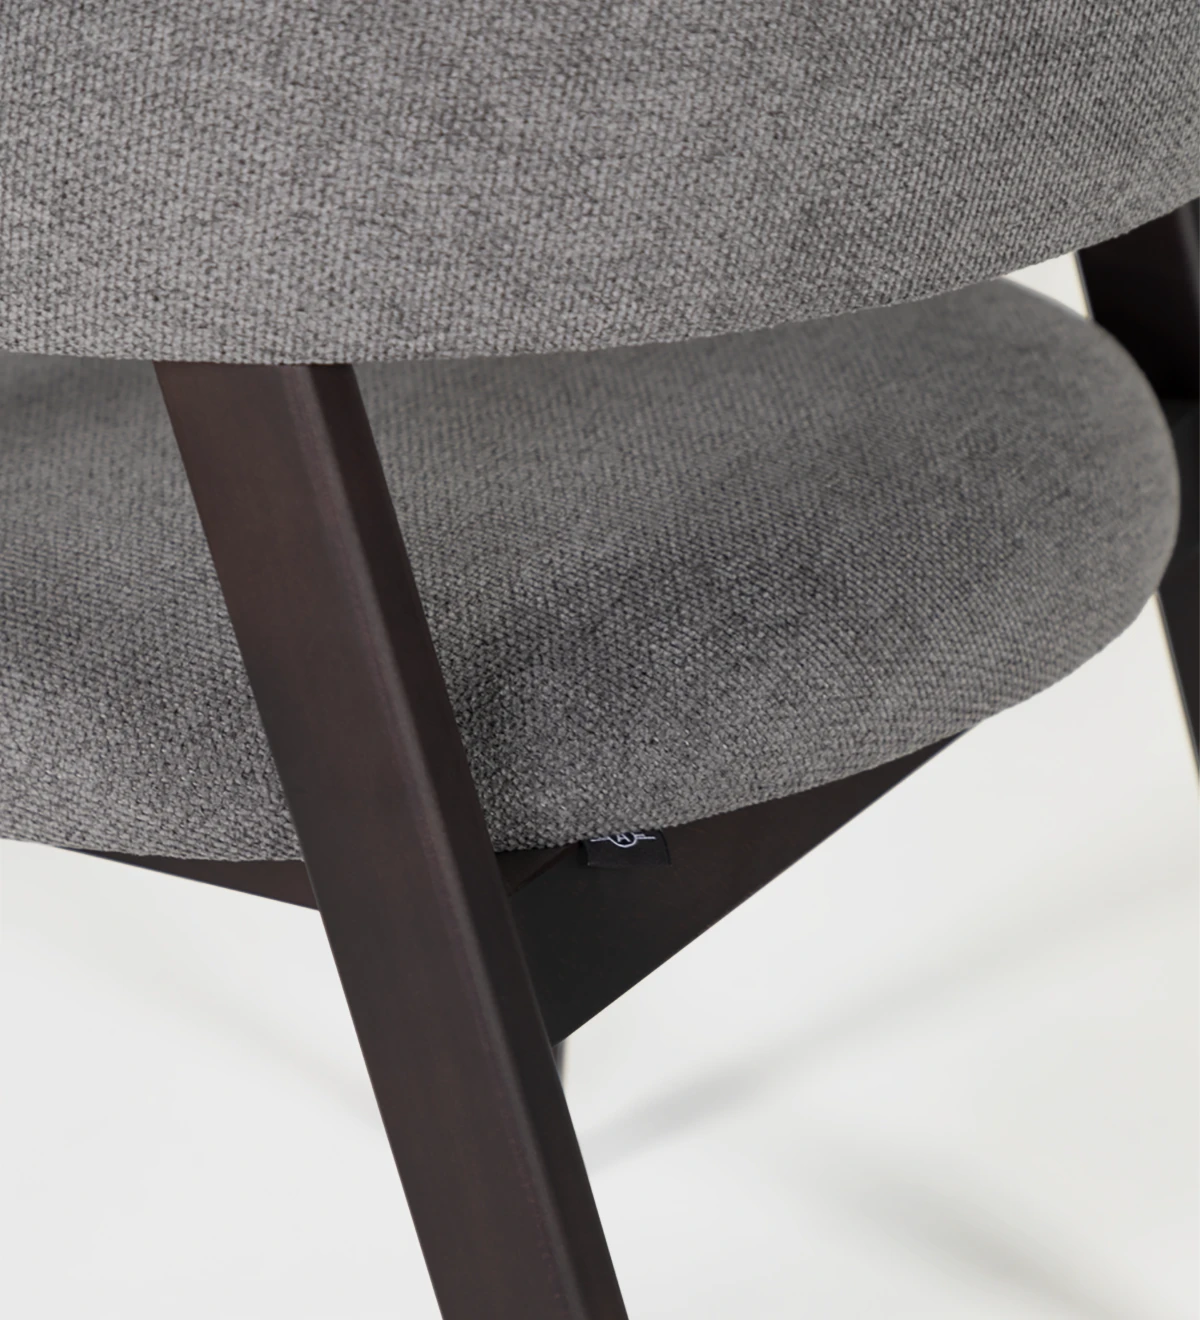 Dark brown ash wood chair with fabric upholstered armrest, seat and back.